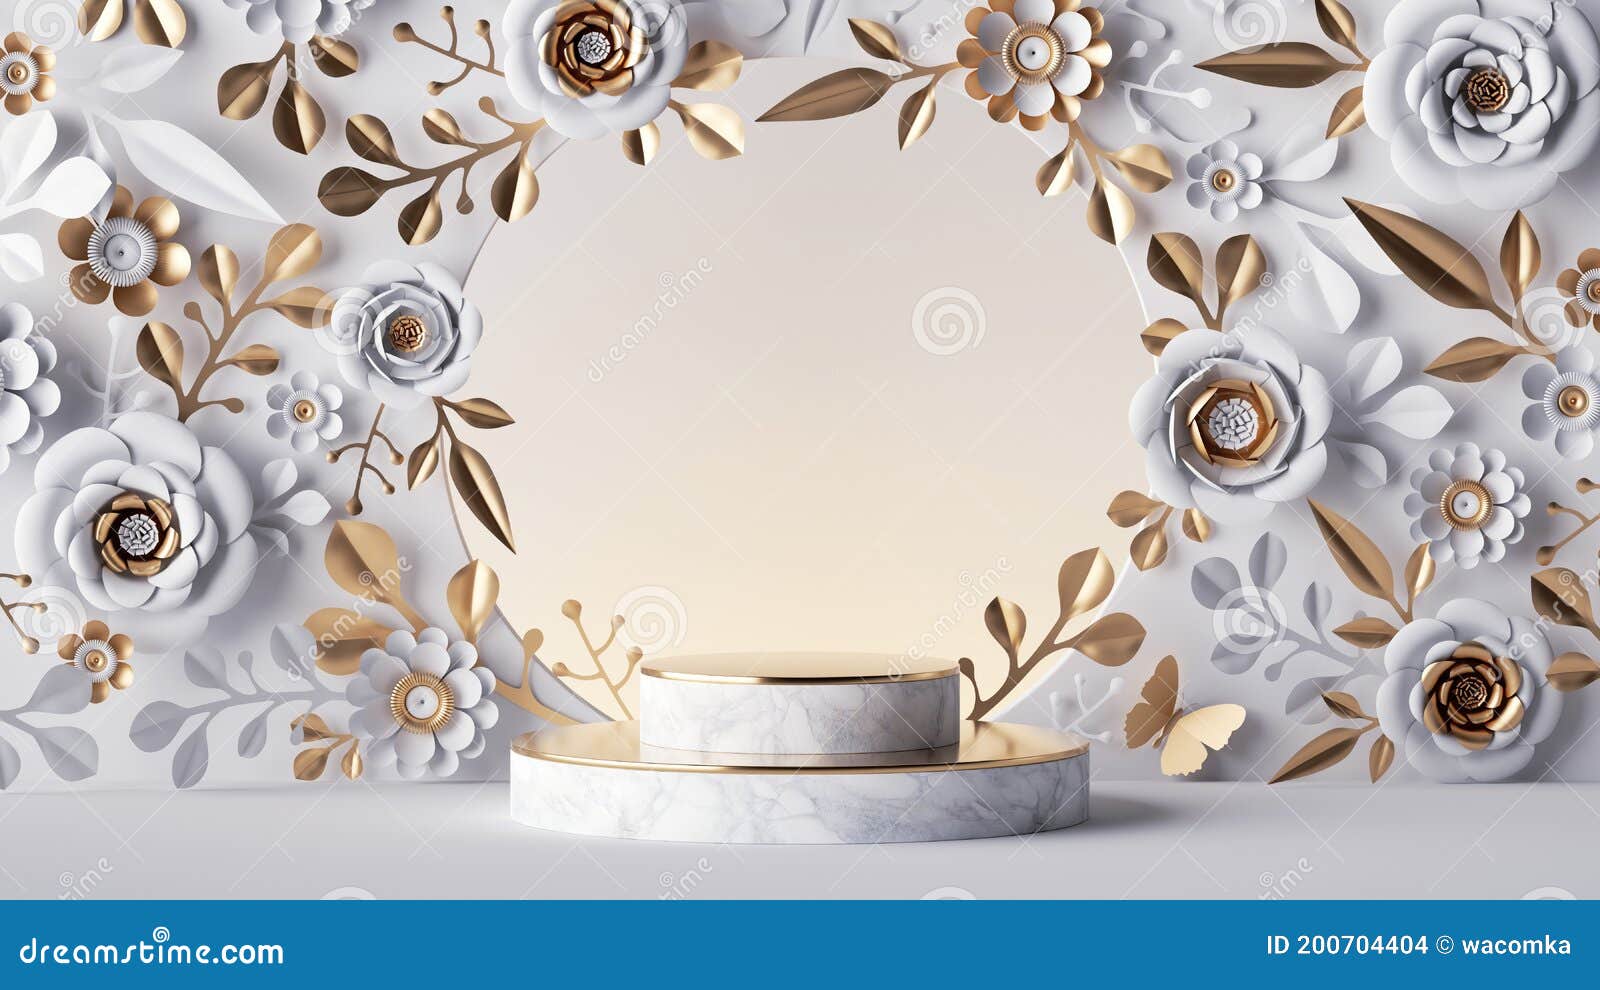 Rose gold circle frame with floral on marble background for